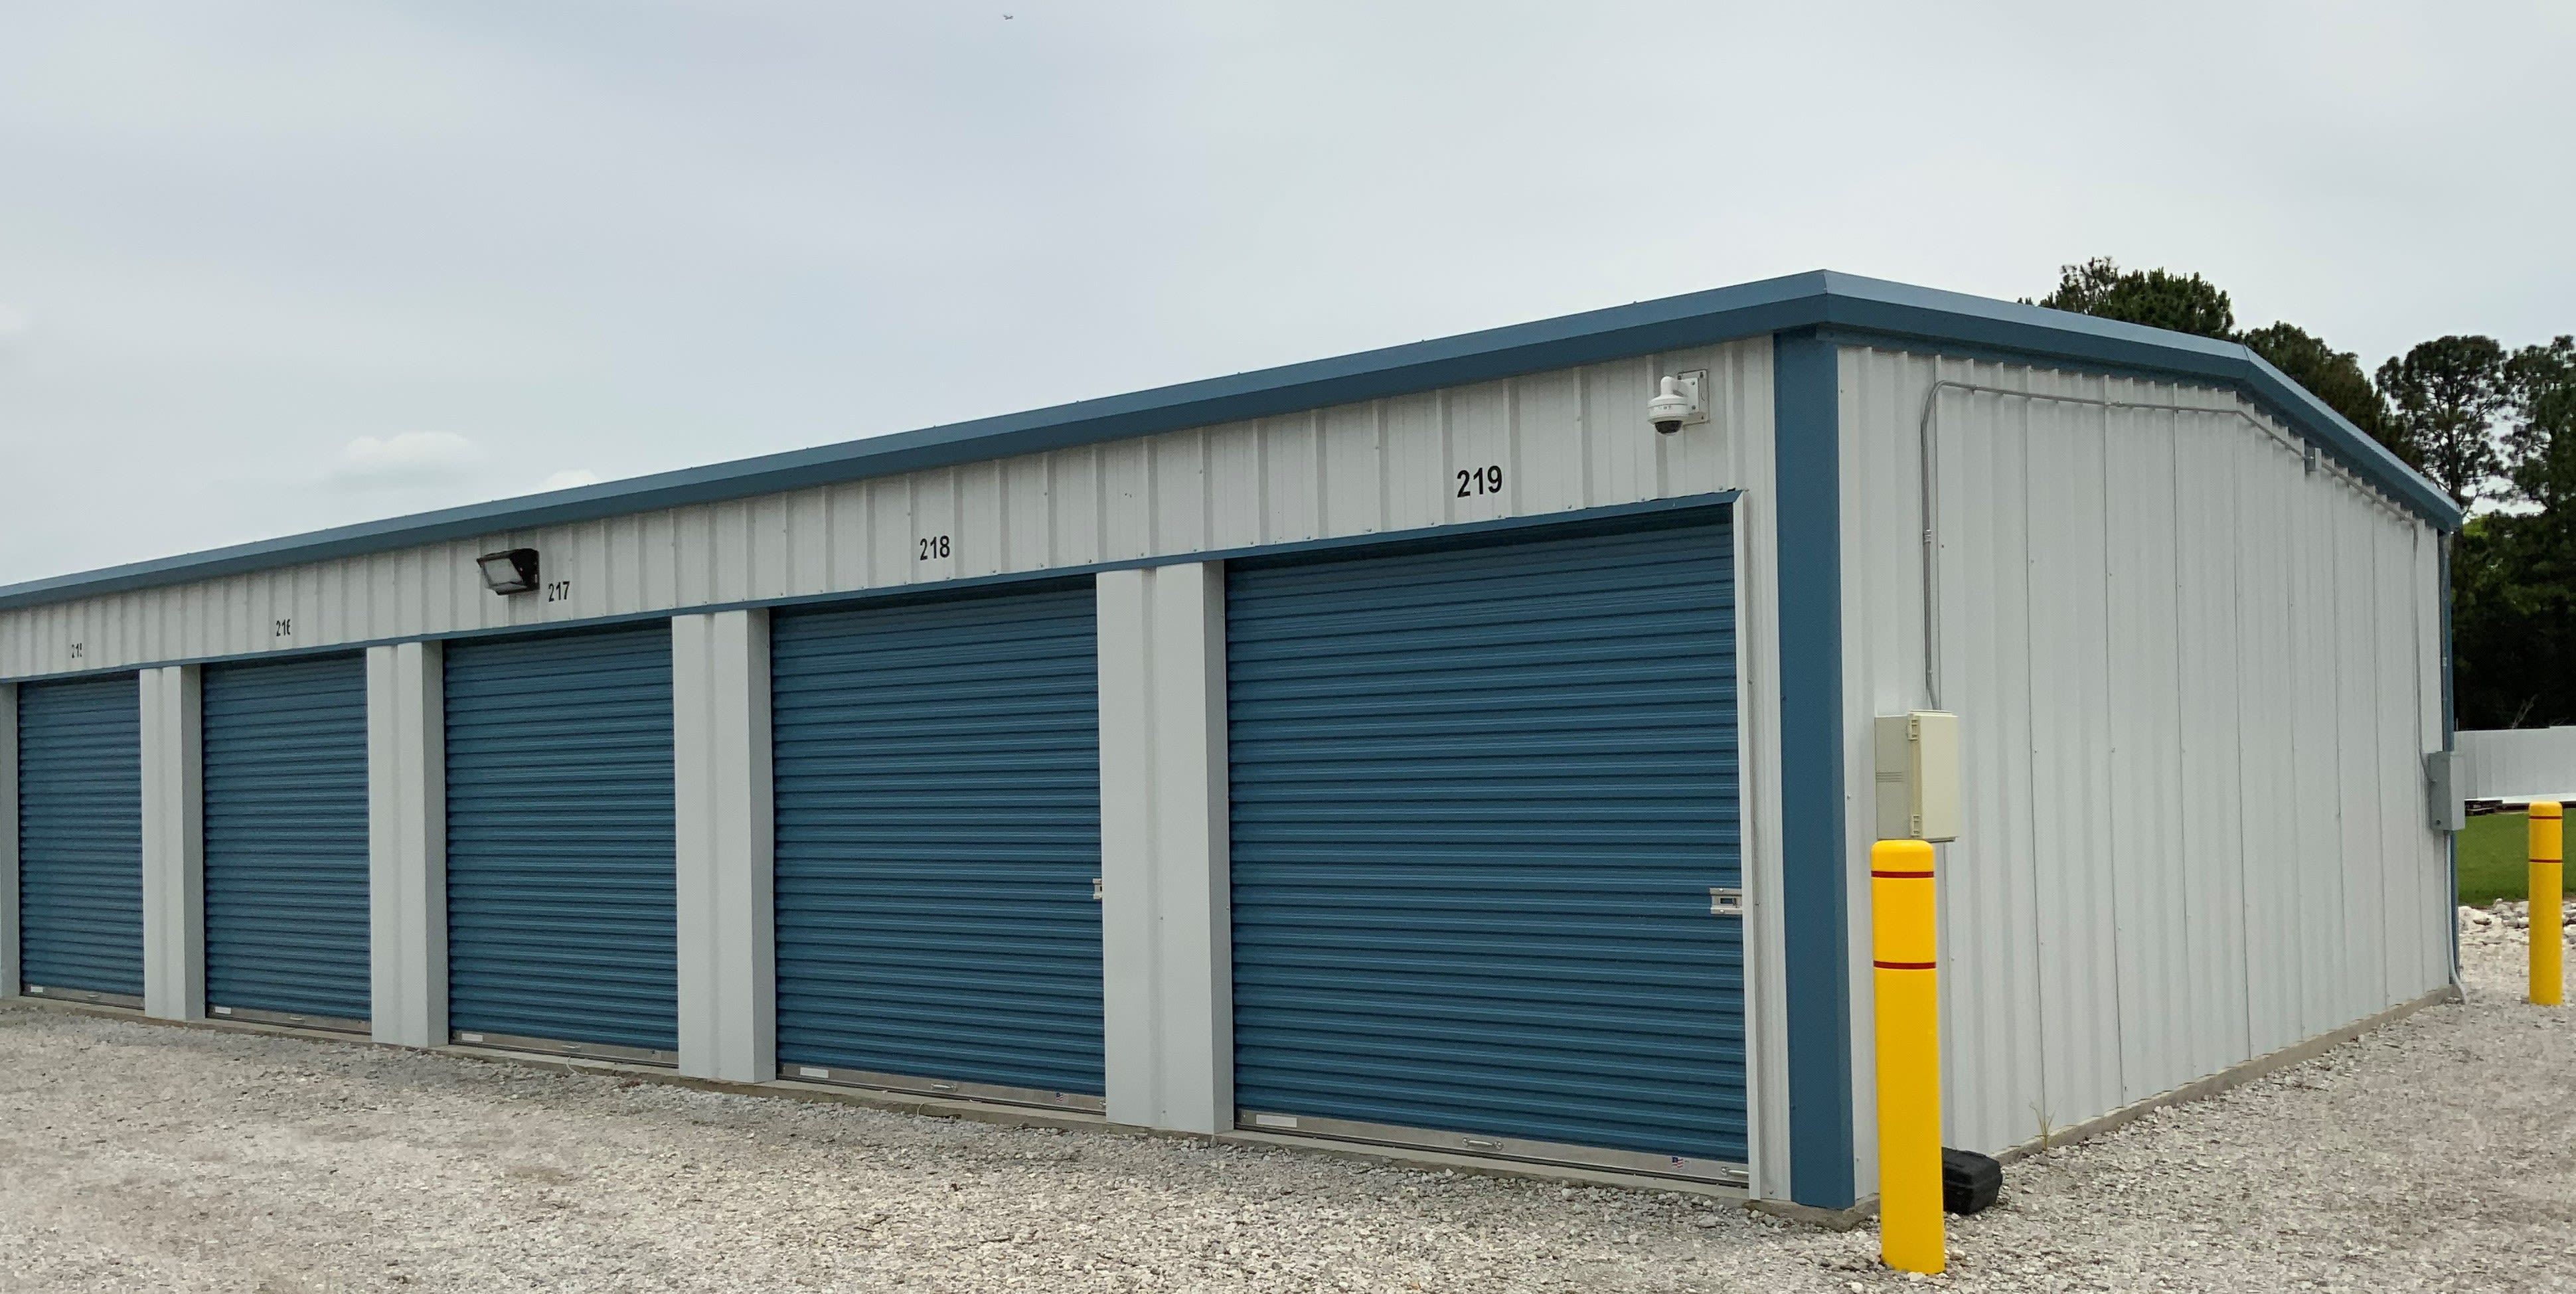 View our list of features at KO Storage of Azle in Azle, Texas